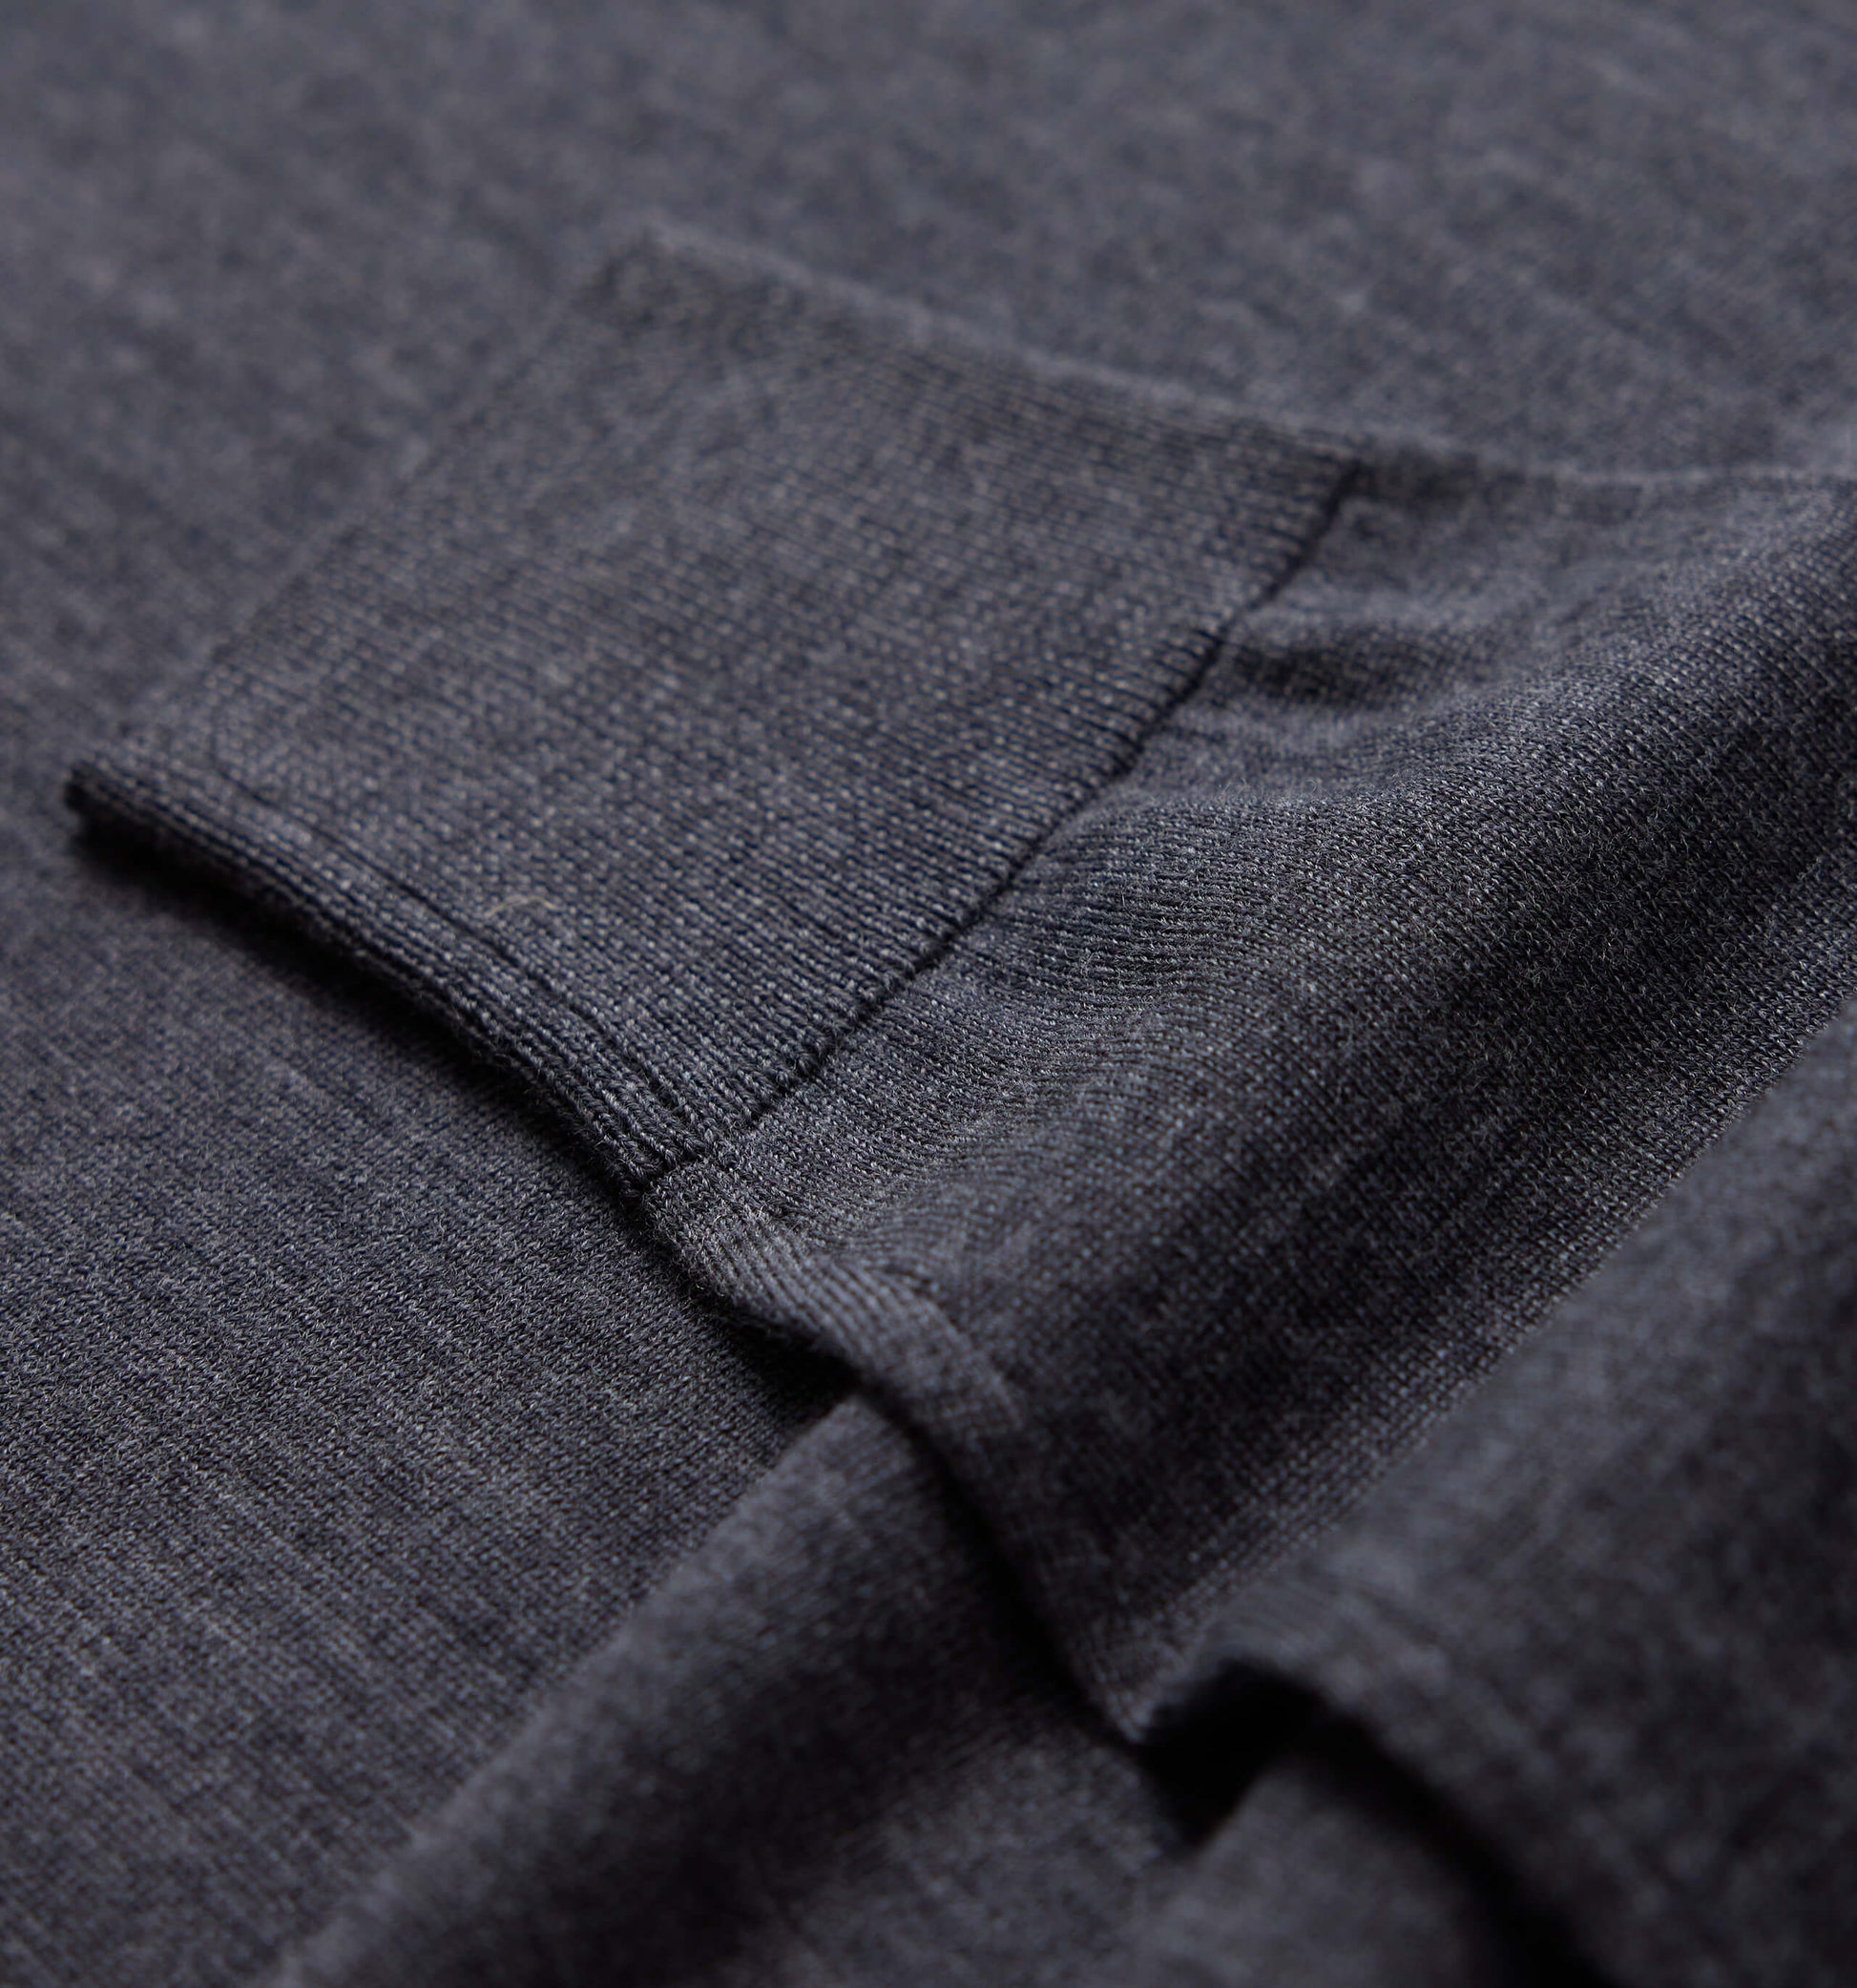 The Michael - Merino Wool Zip Mock In Charcoal From King Essentials